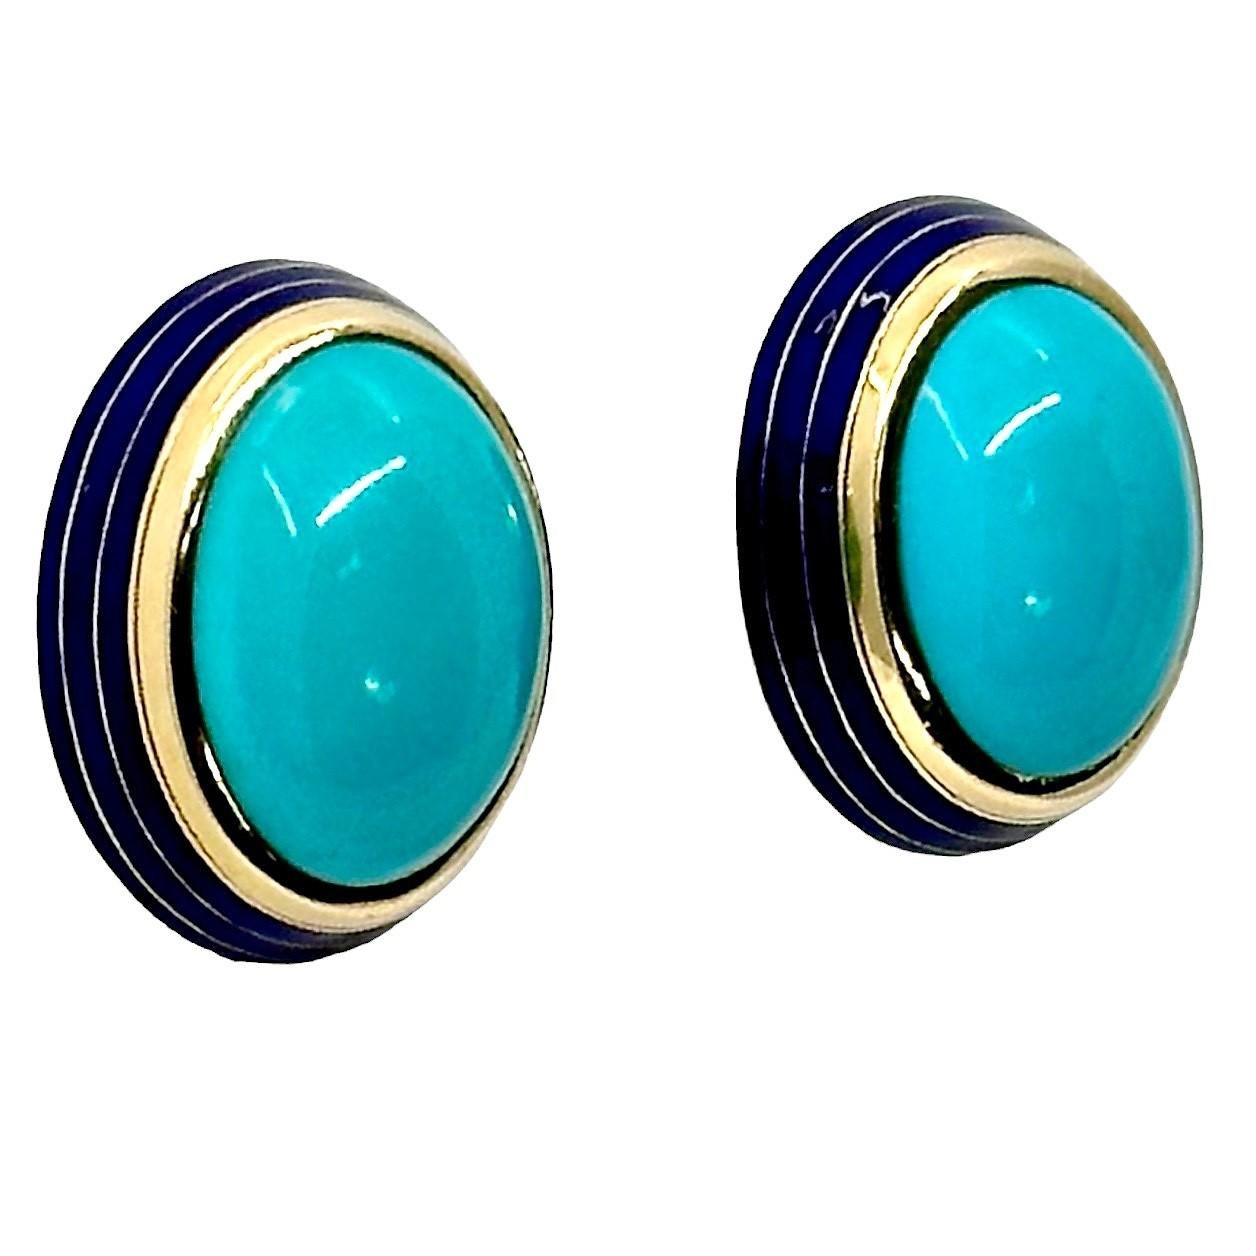 Modern Tailored, Mid-20th Century 18K Yellow Gold, Turquoise and Blue Enamel Earrings For Sale